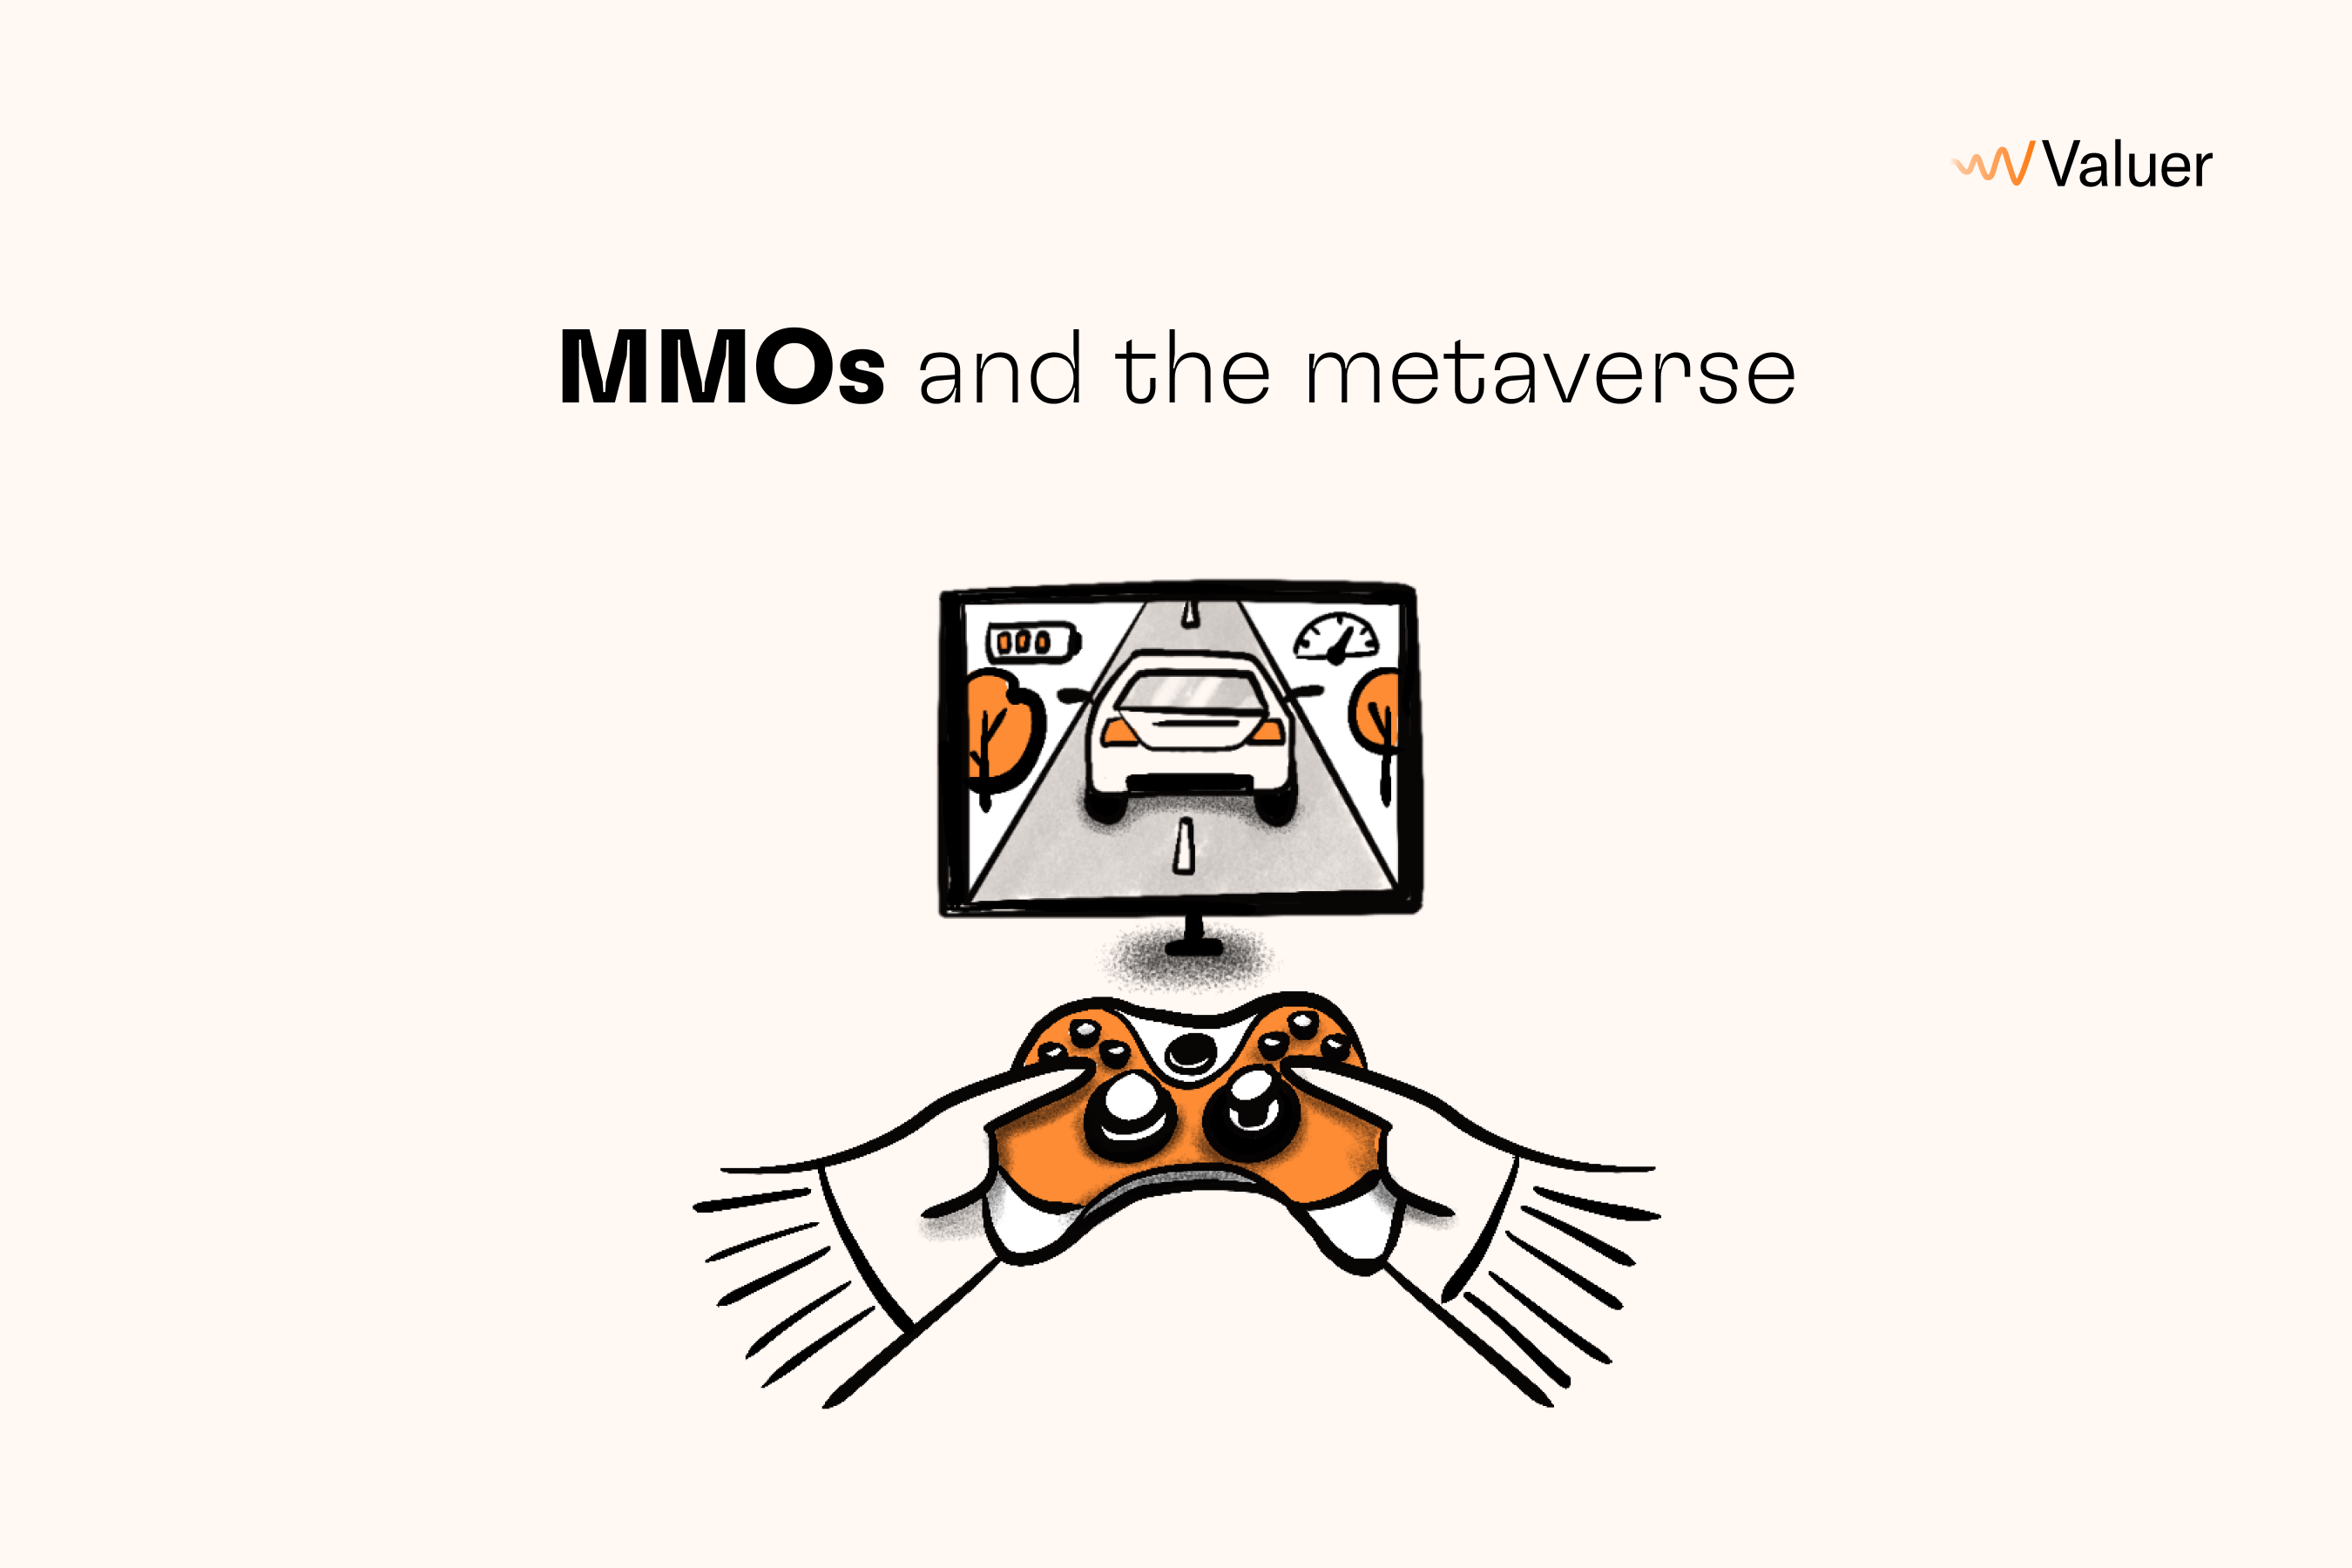 MMOs and the metaverse